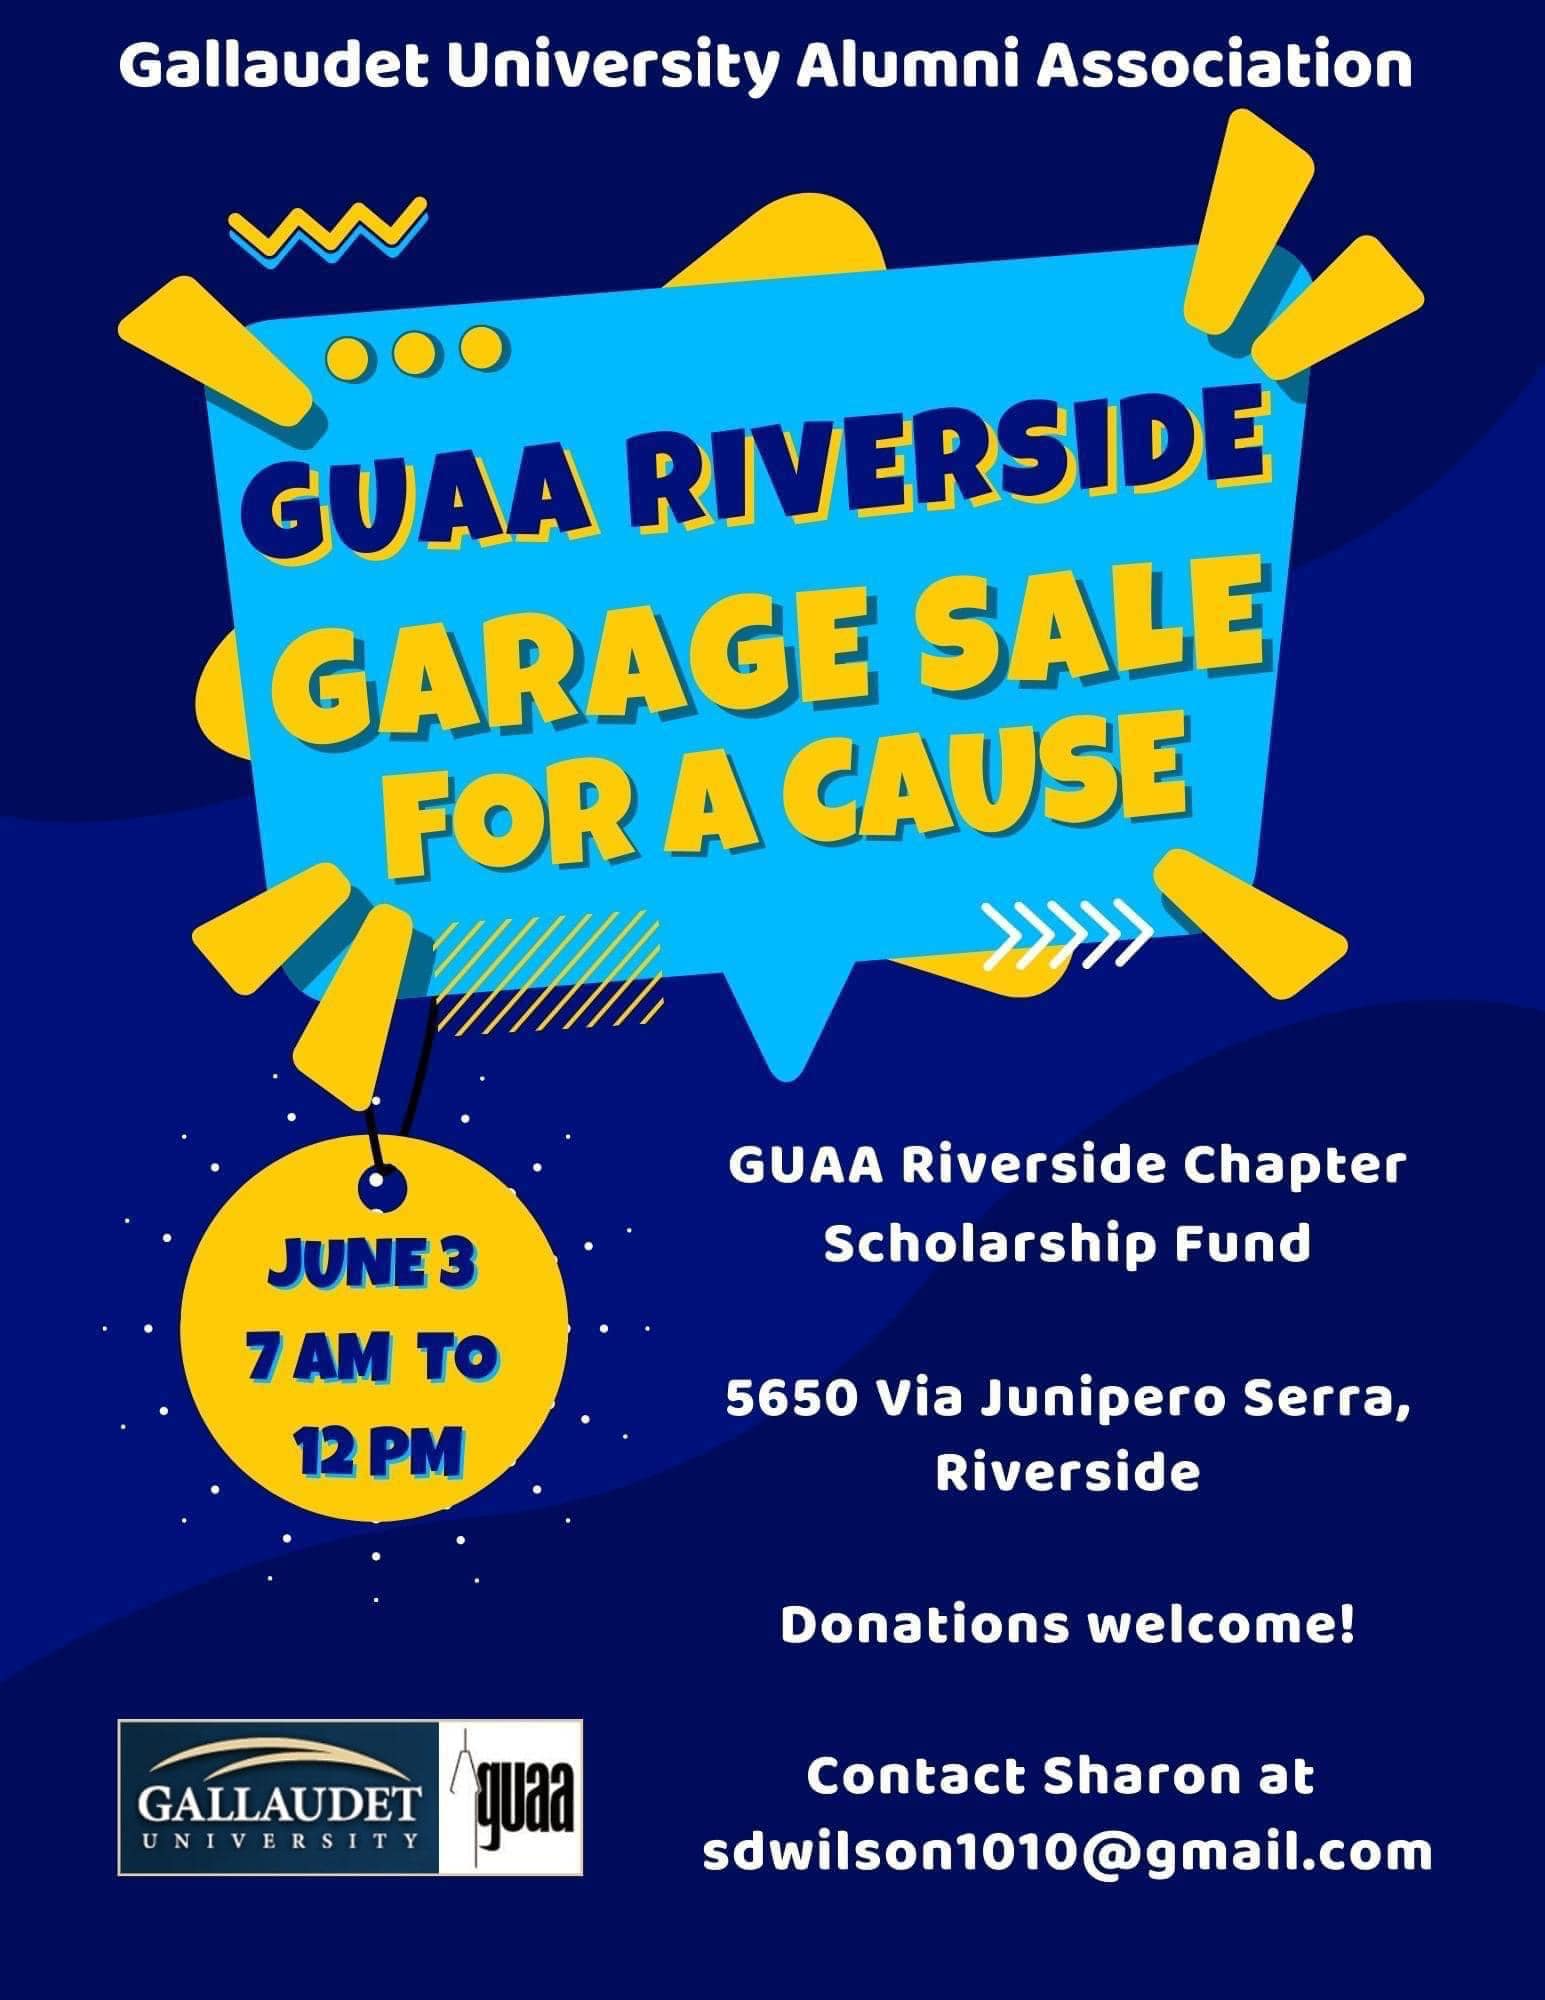 Southern California alumni: Please support the GUAA Riverside Chapter! This garage sale will help fund the chapter’s annual scholarships.